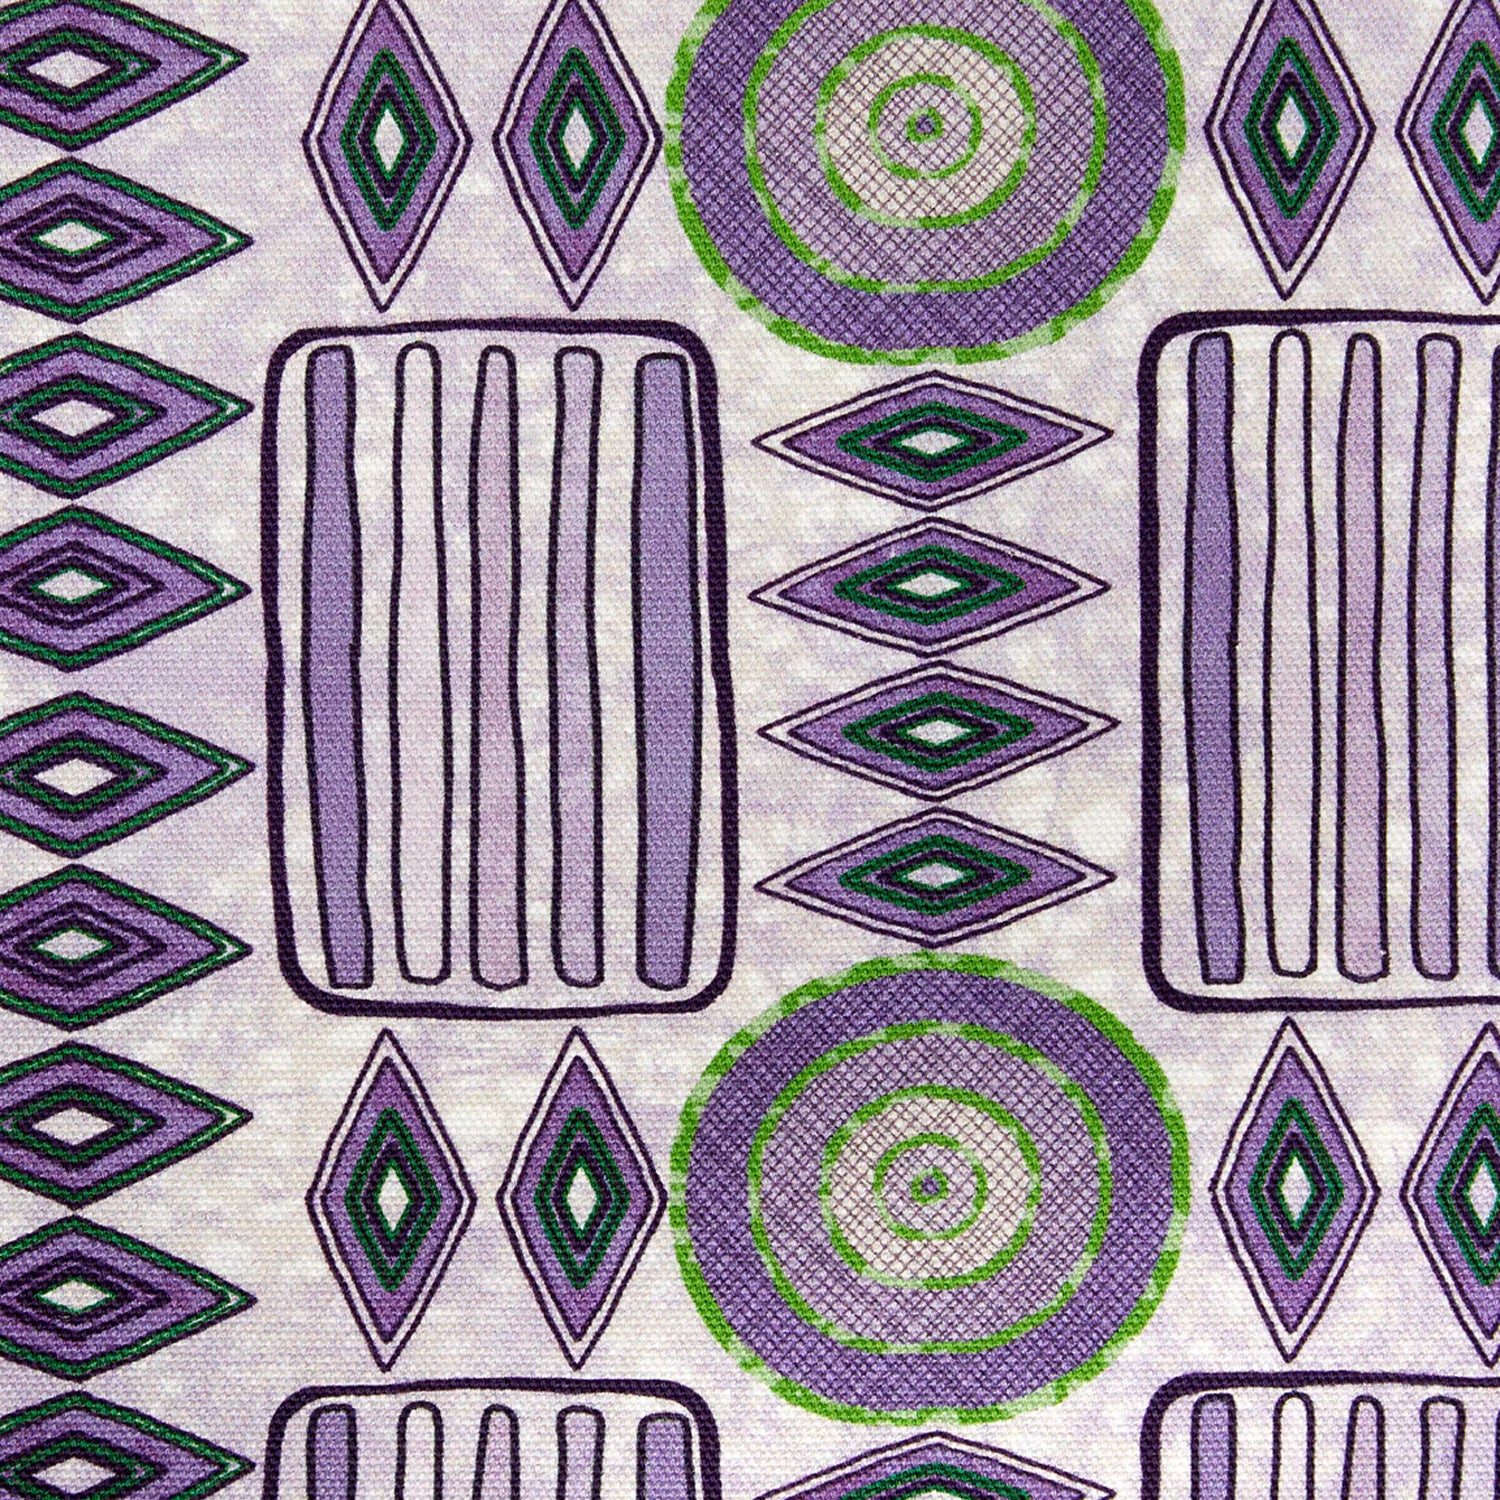 Detail of fabric in a playful geometric stripe print in shades of purple with green accents.